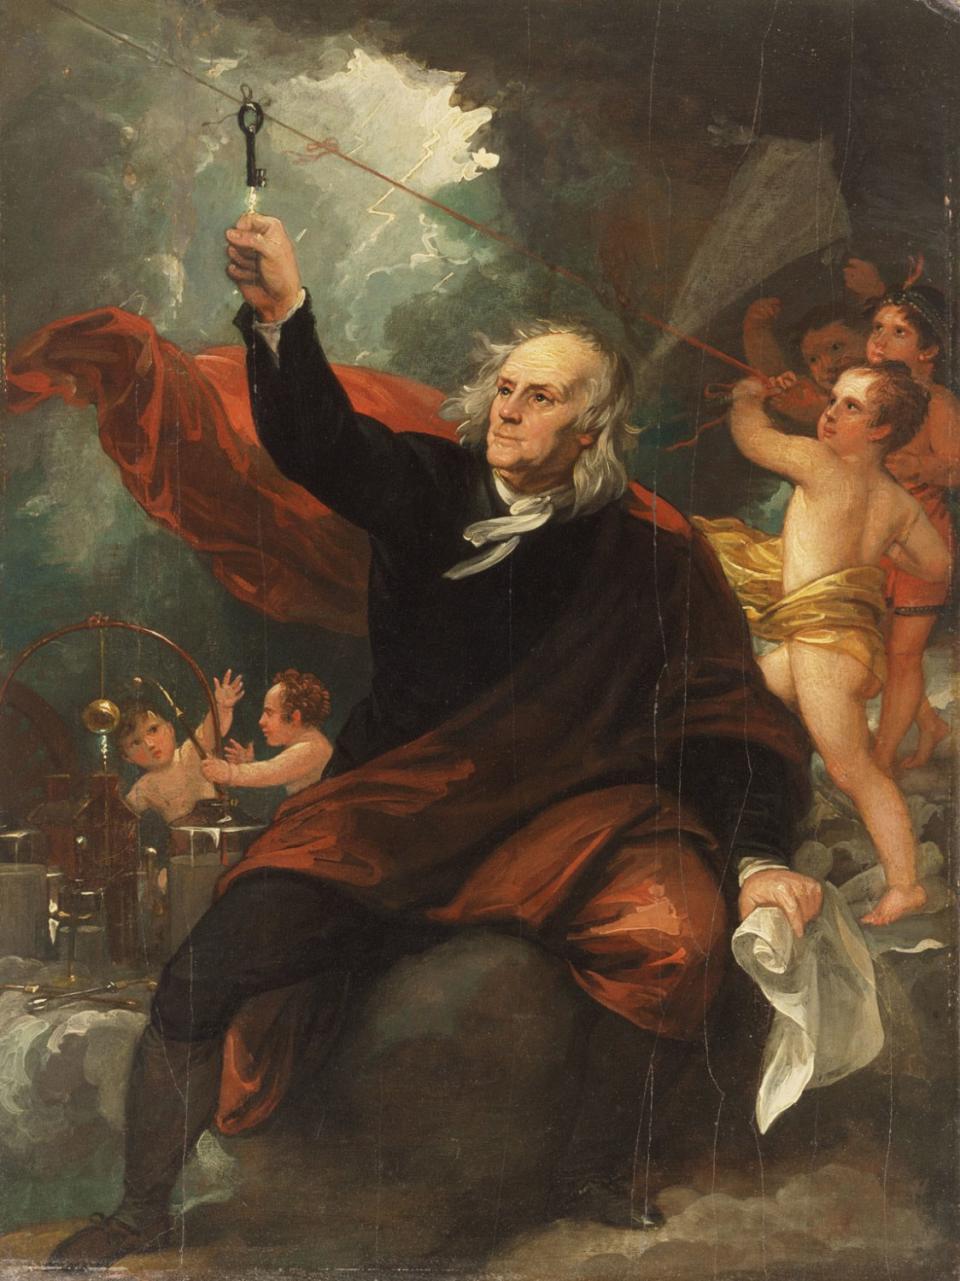 Benjamin Franklin Drawing Electricity from the Sky by Benjamin West, 1816.